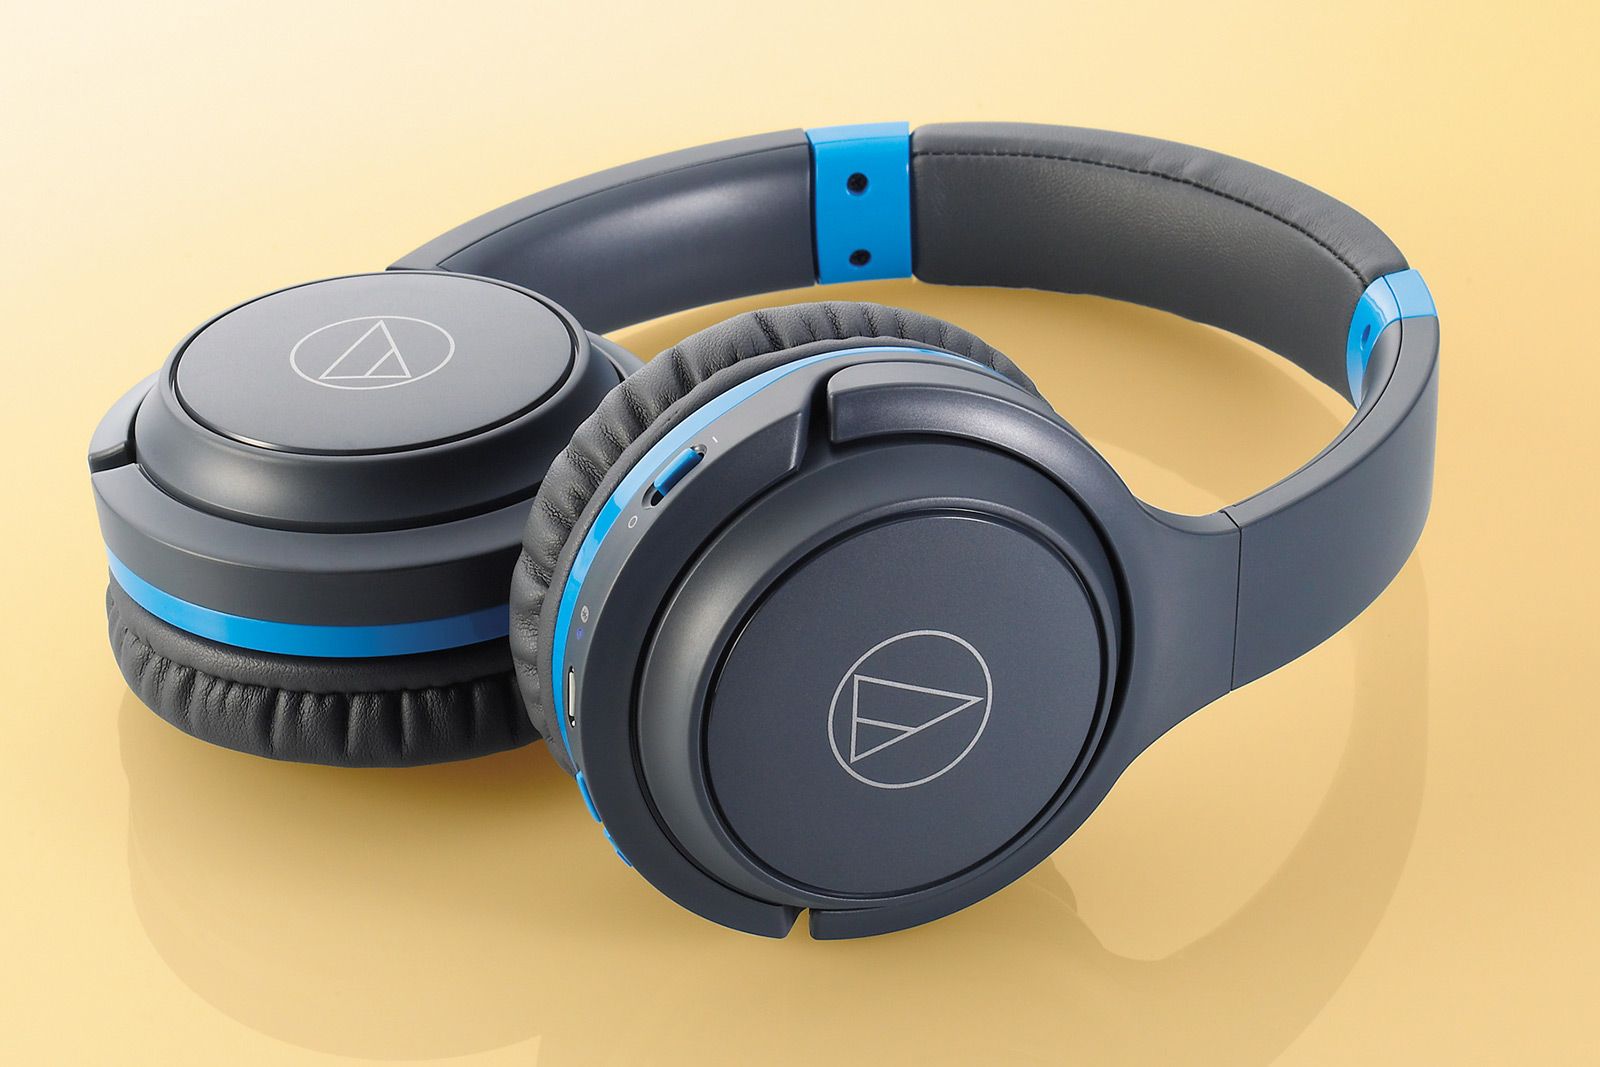 Audio-Technica launches ANC700BT wireless over-ear headphones with noise-cancellation and 30 hour battery life image 2